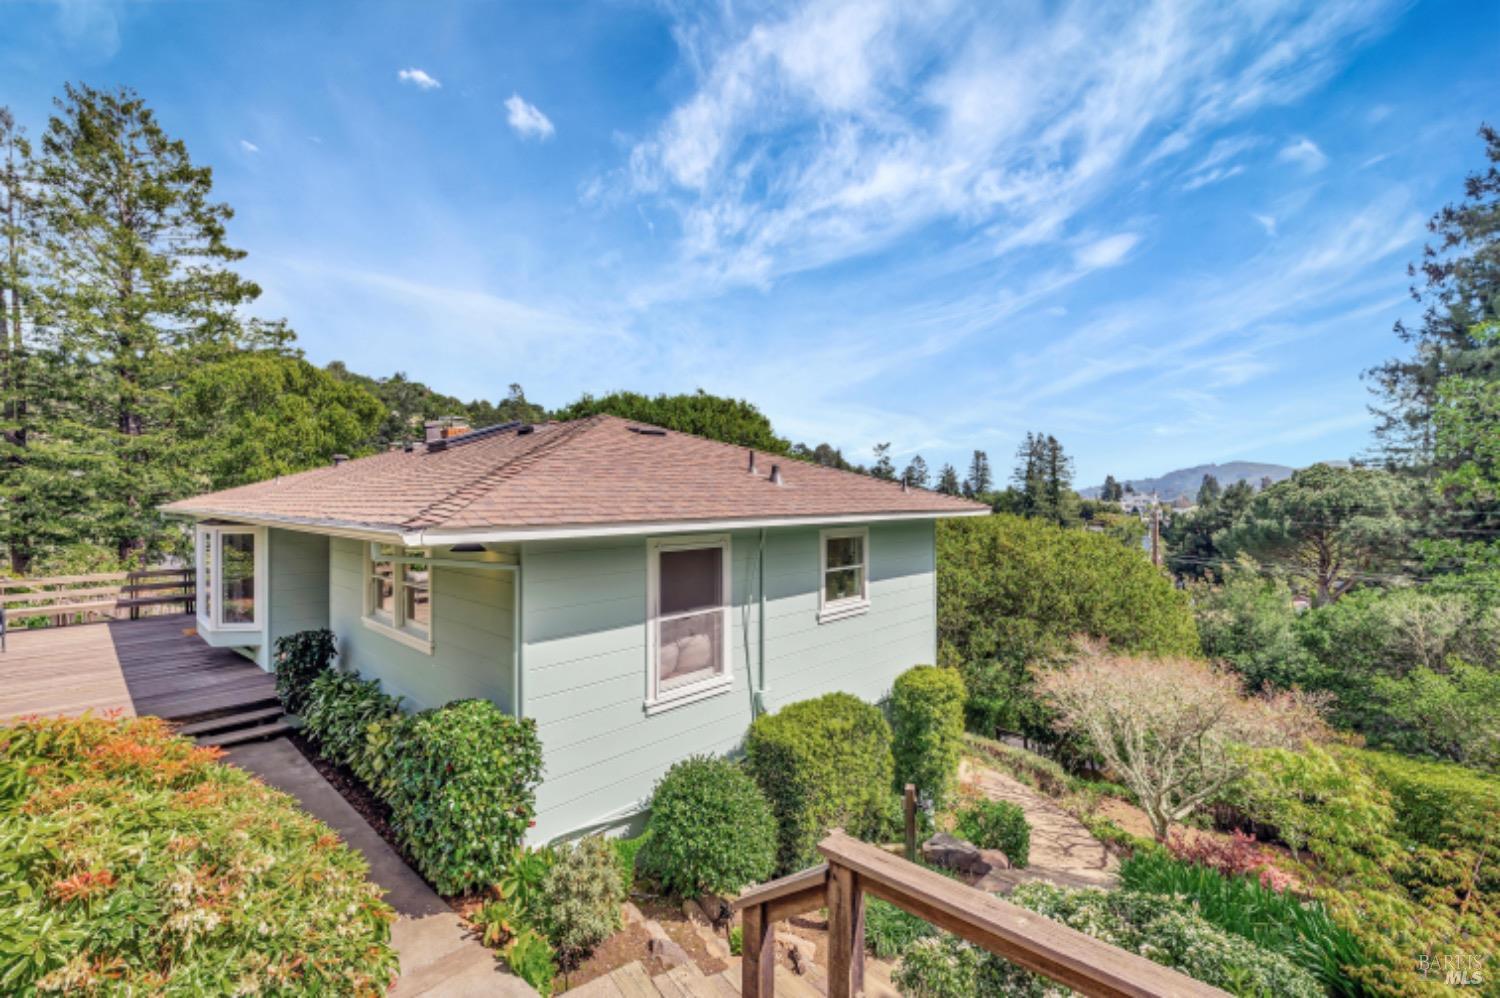 Photo of 60 Circle Ave in Mill Valley, CA